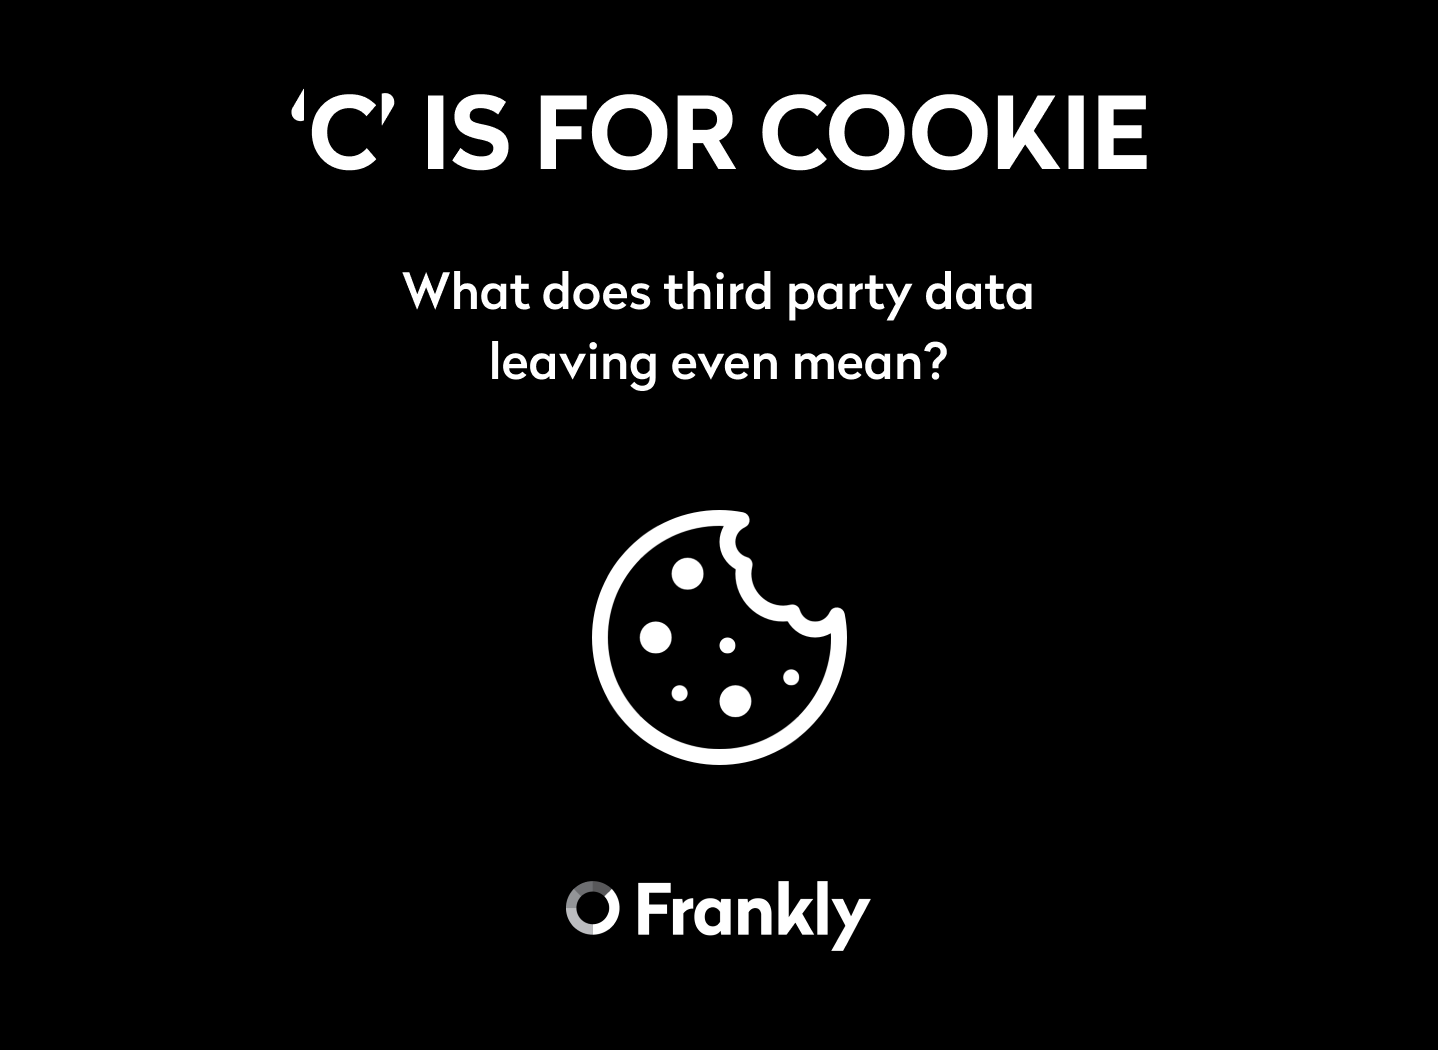 'C' Is For Cookie: What does third party data leaving even mean?